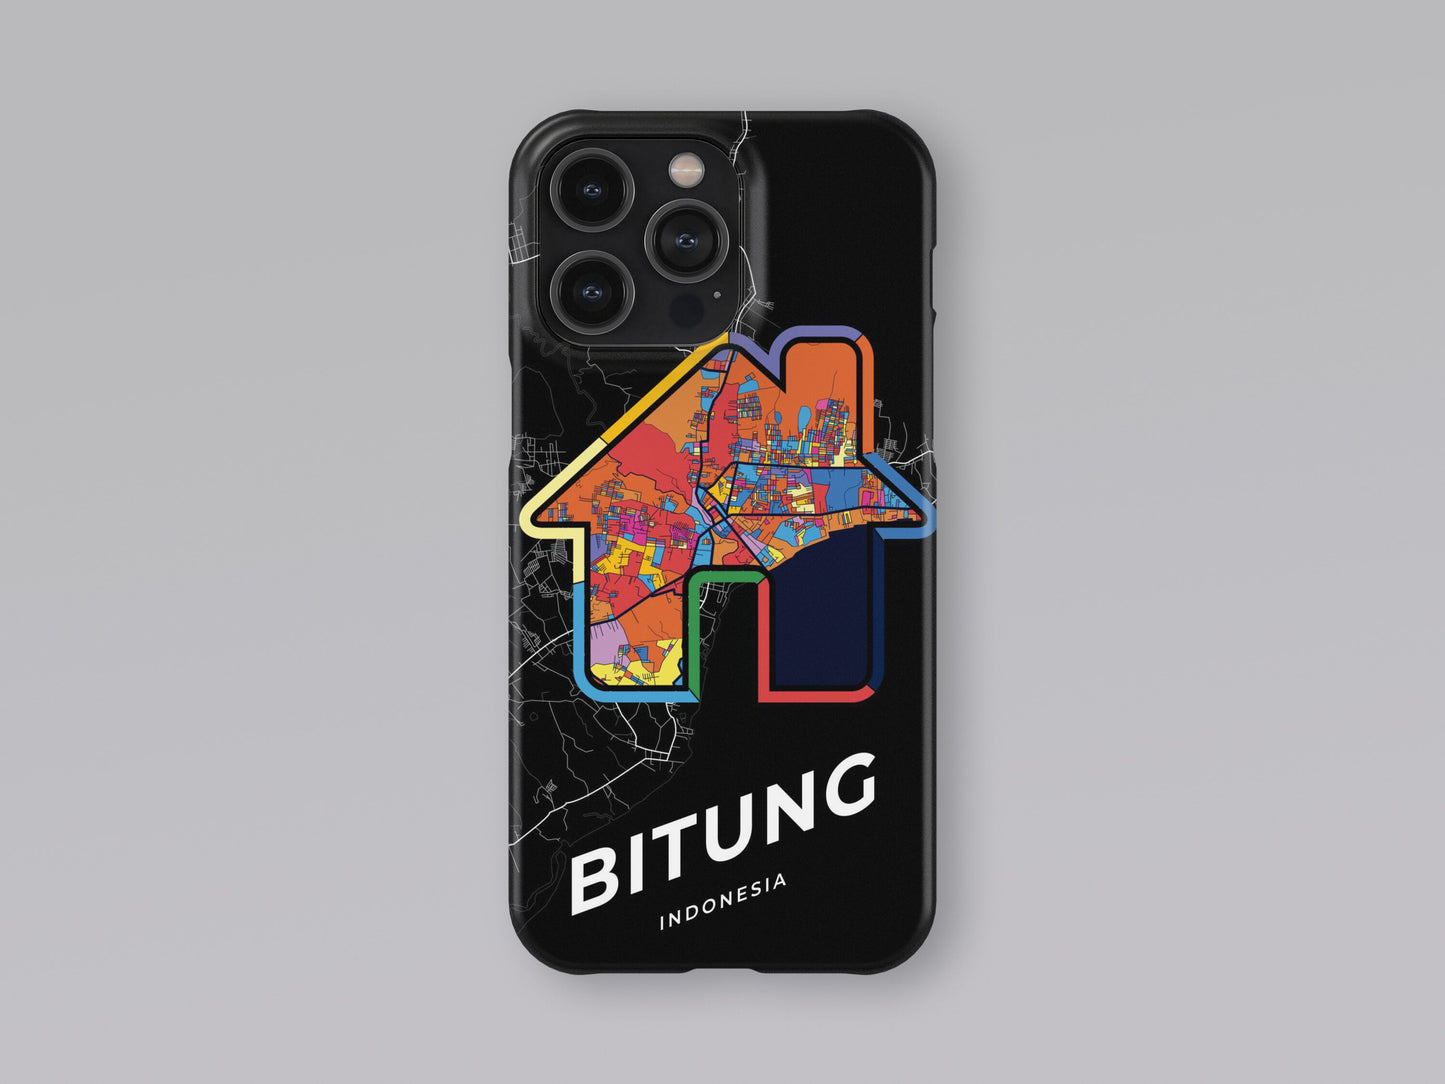 Bitung Indonesia slim phone case with colorful icon. Birthday, wedding or housewarming gift. Couple match cases. 3